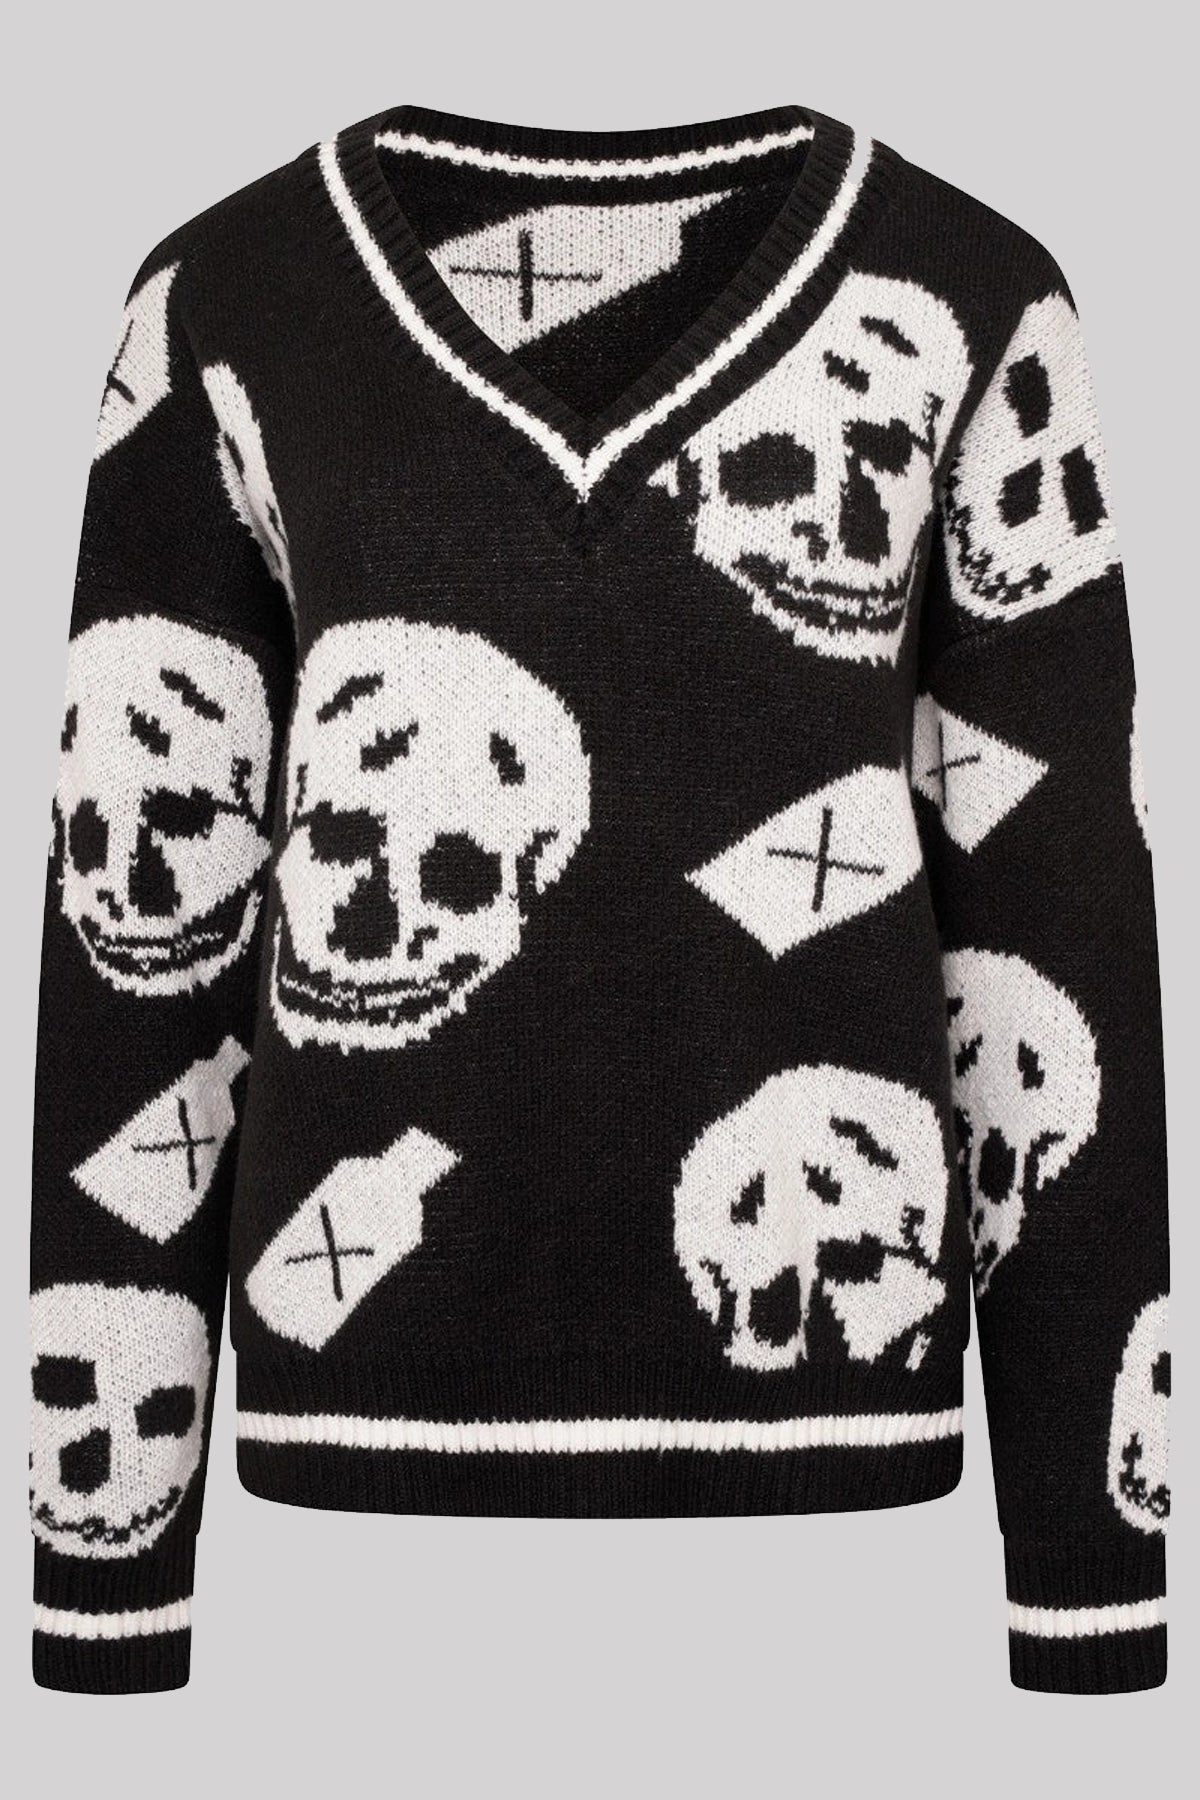 Ro Rox Skull Poizon Chunky Gothic Knitted Long Sleeve Jumper